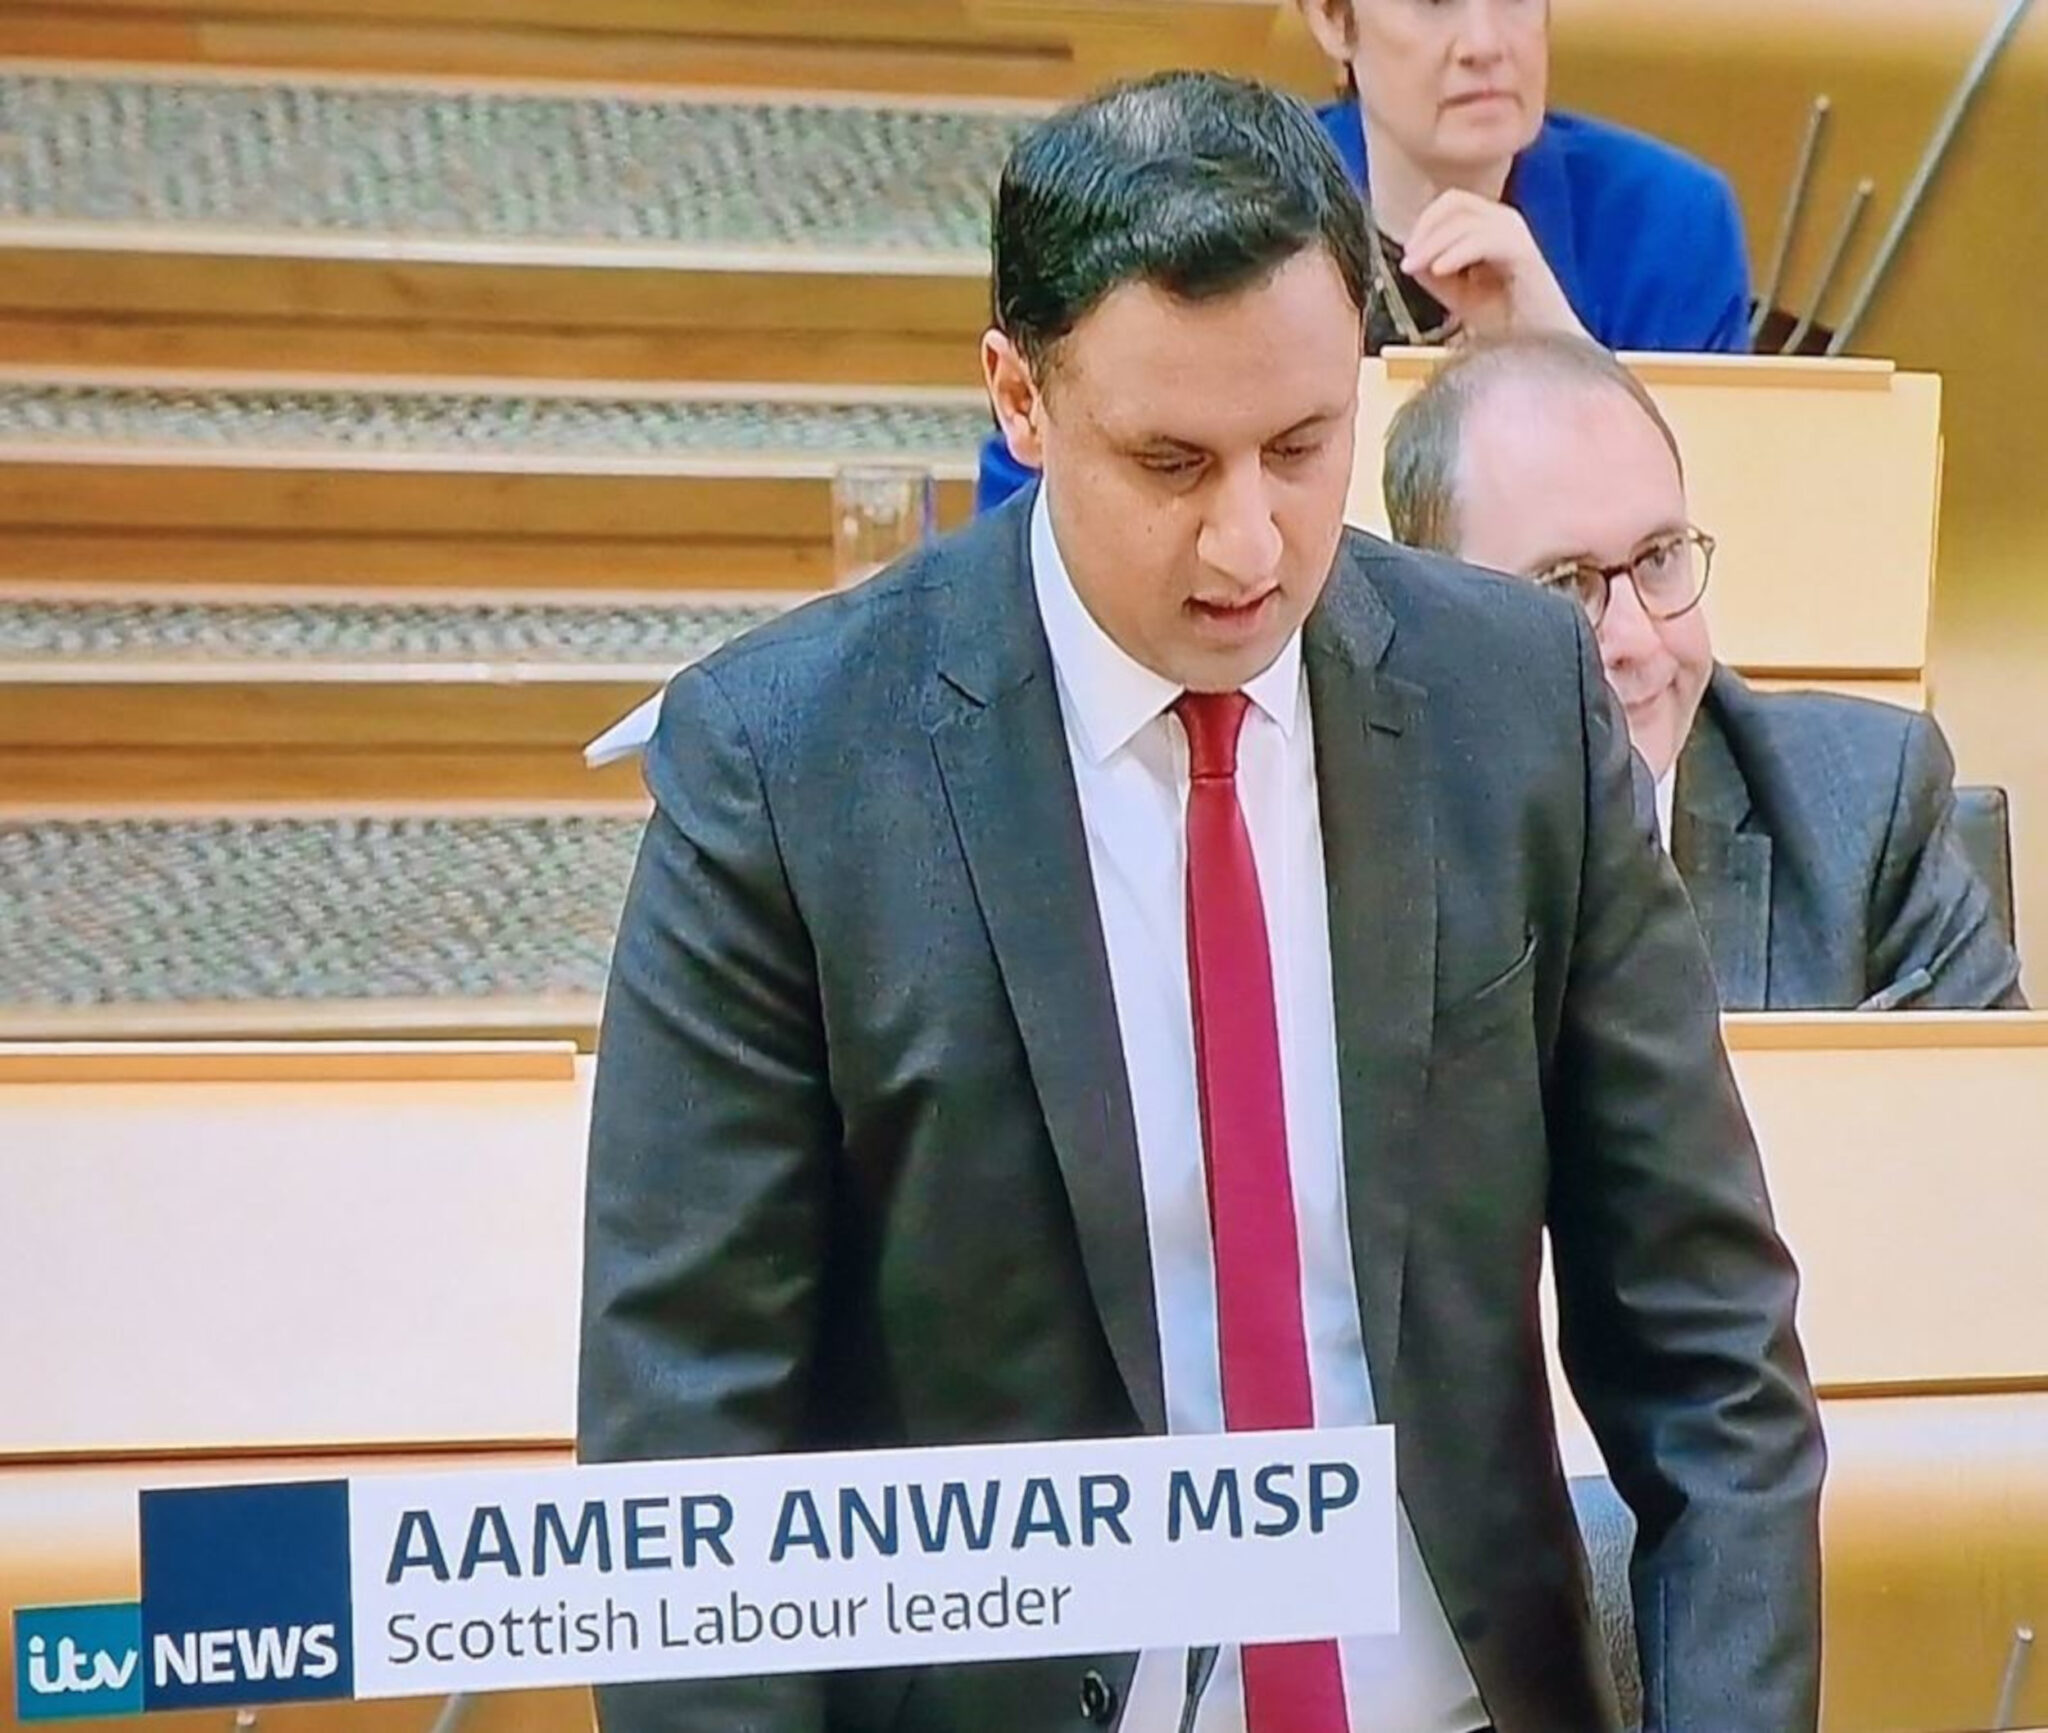 Aamer Anwar being mislabeled as Scots Labour leader Anas Sarwar by ITV